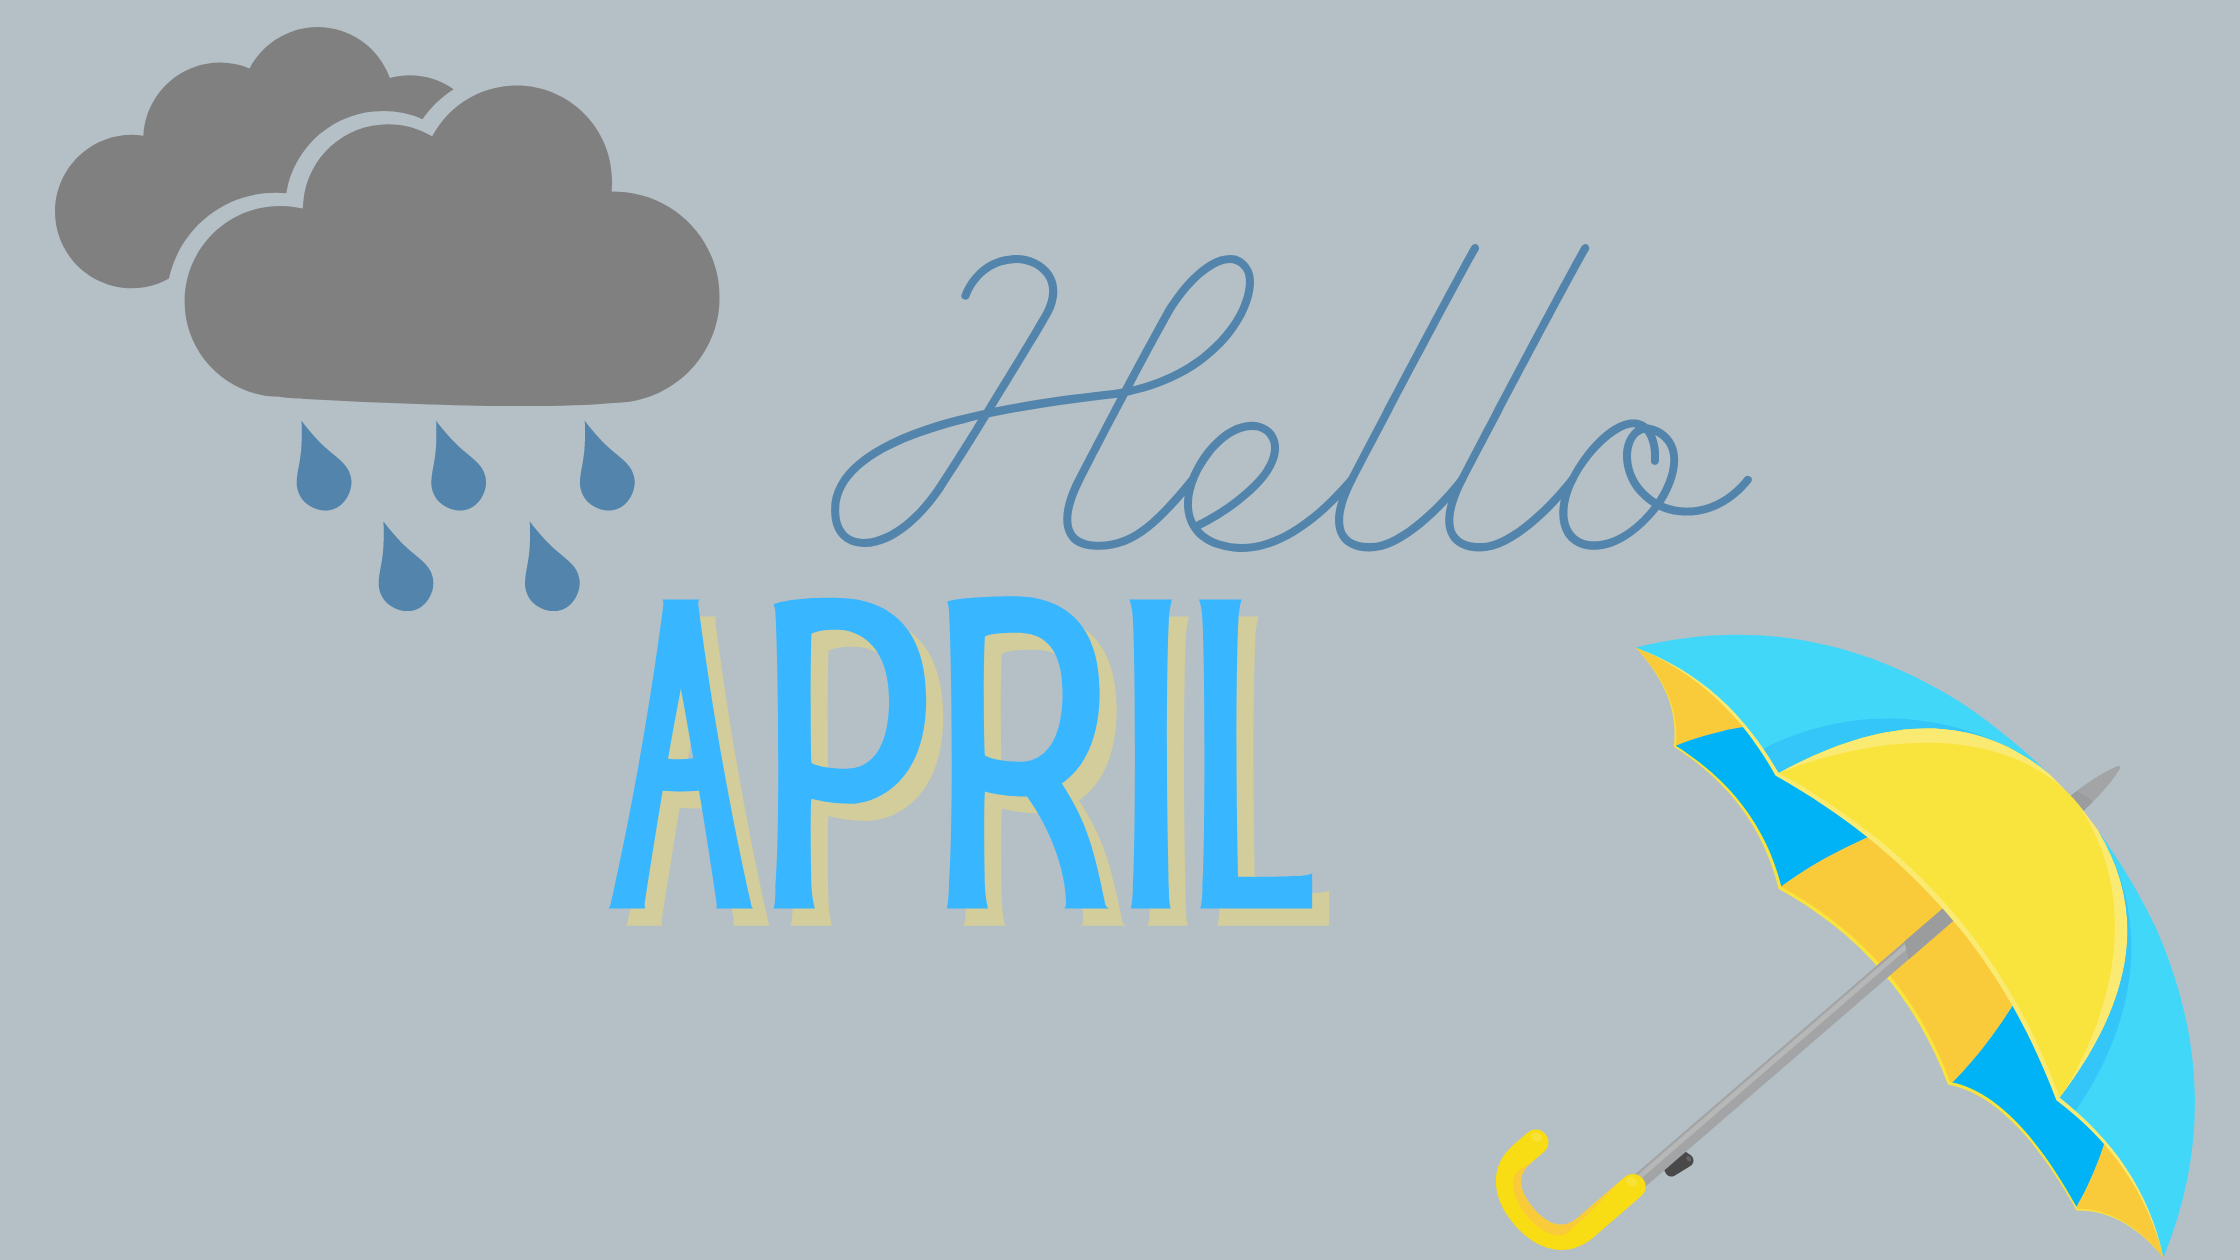 a graphic that states "Hello April" in the upper left corner is a rain cloud. In the bottom right corner is a blue and yellow open umbrella.